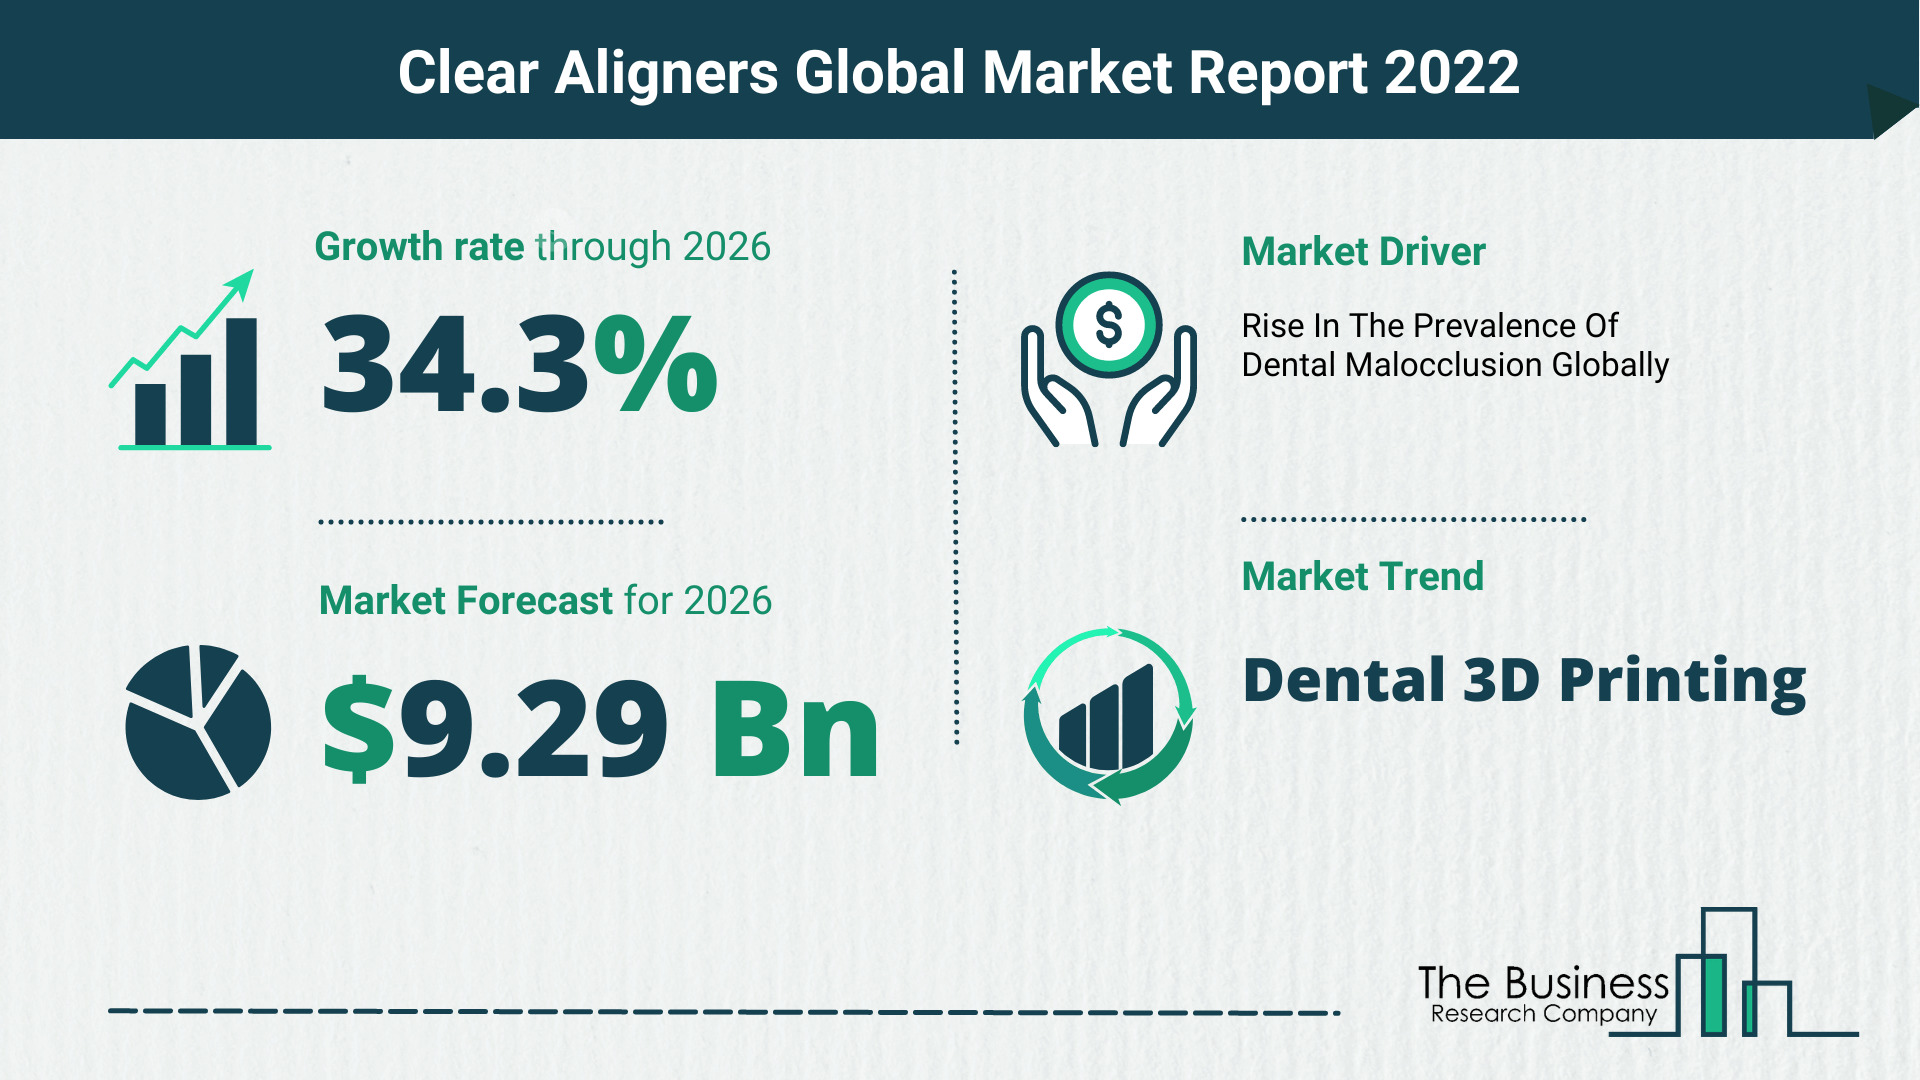 The Clear Aligners Market Share, Market Size, And Growth Rate 2022